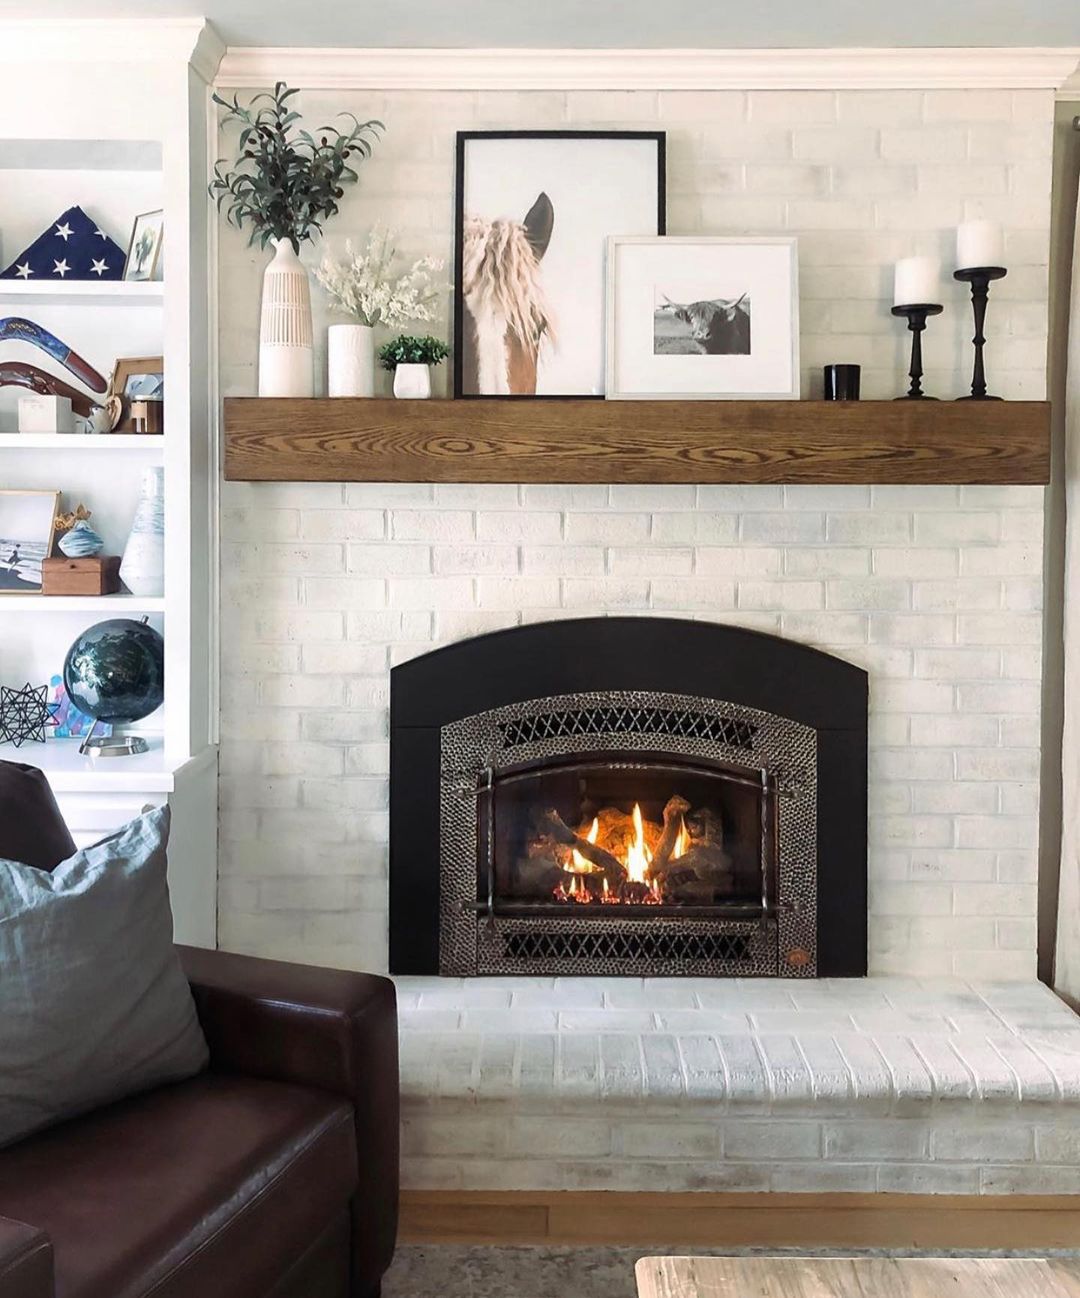 Modern Farmhouse Style with a Limewashed Brick Fireplace